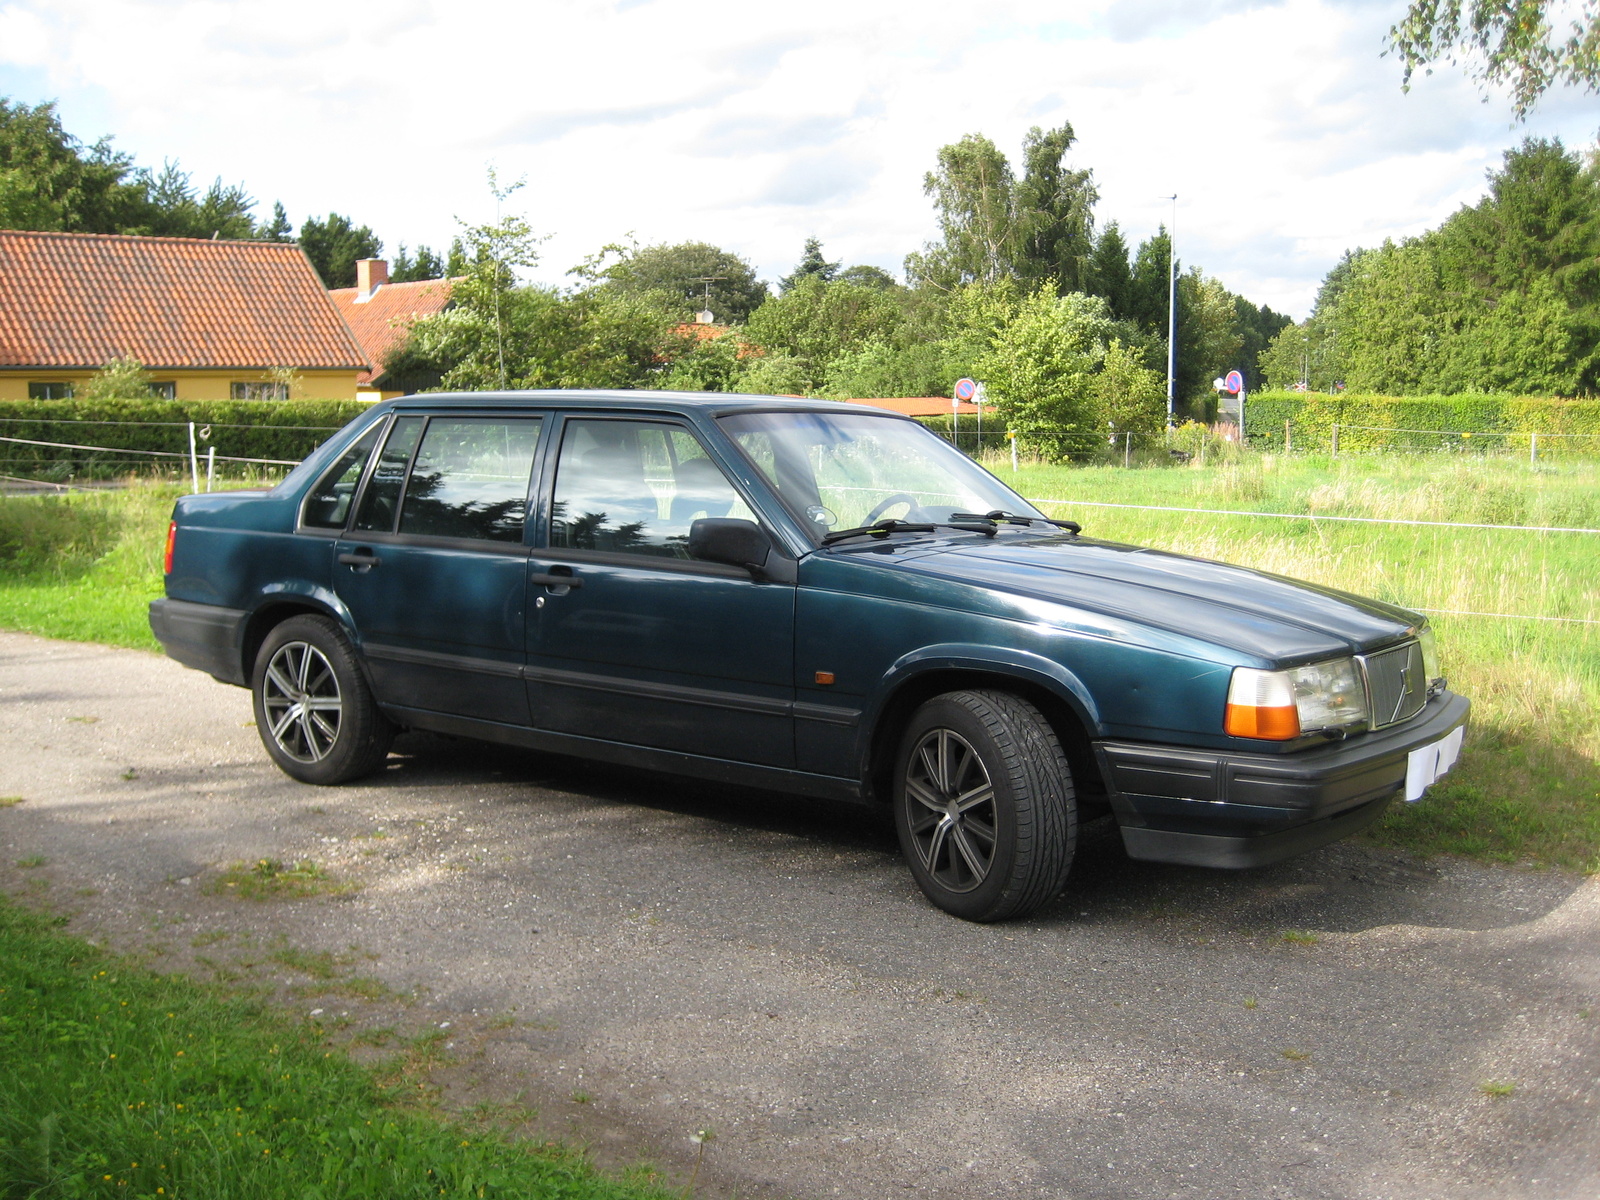 The 1994 Volvo 940 is manufactured by Volvo. This car was first introduced